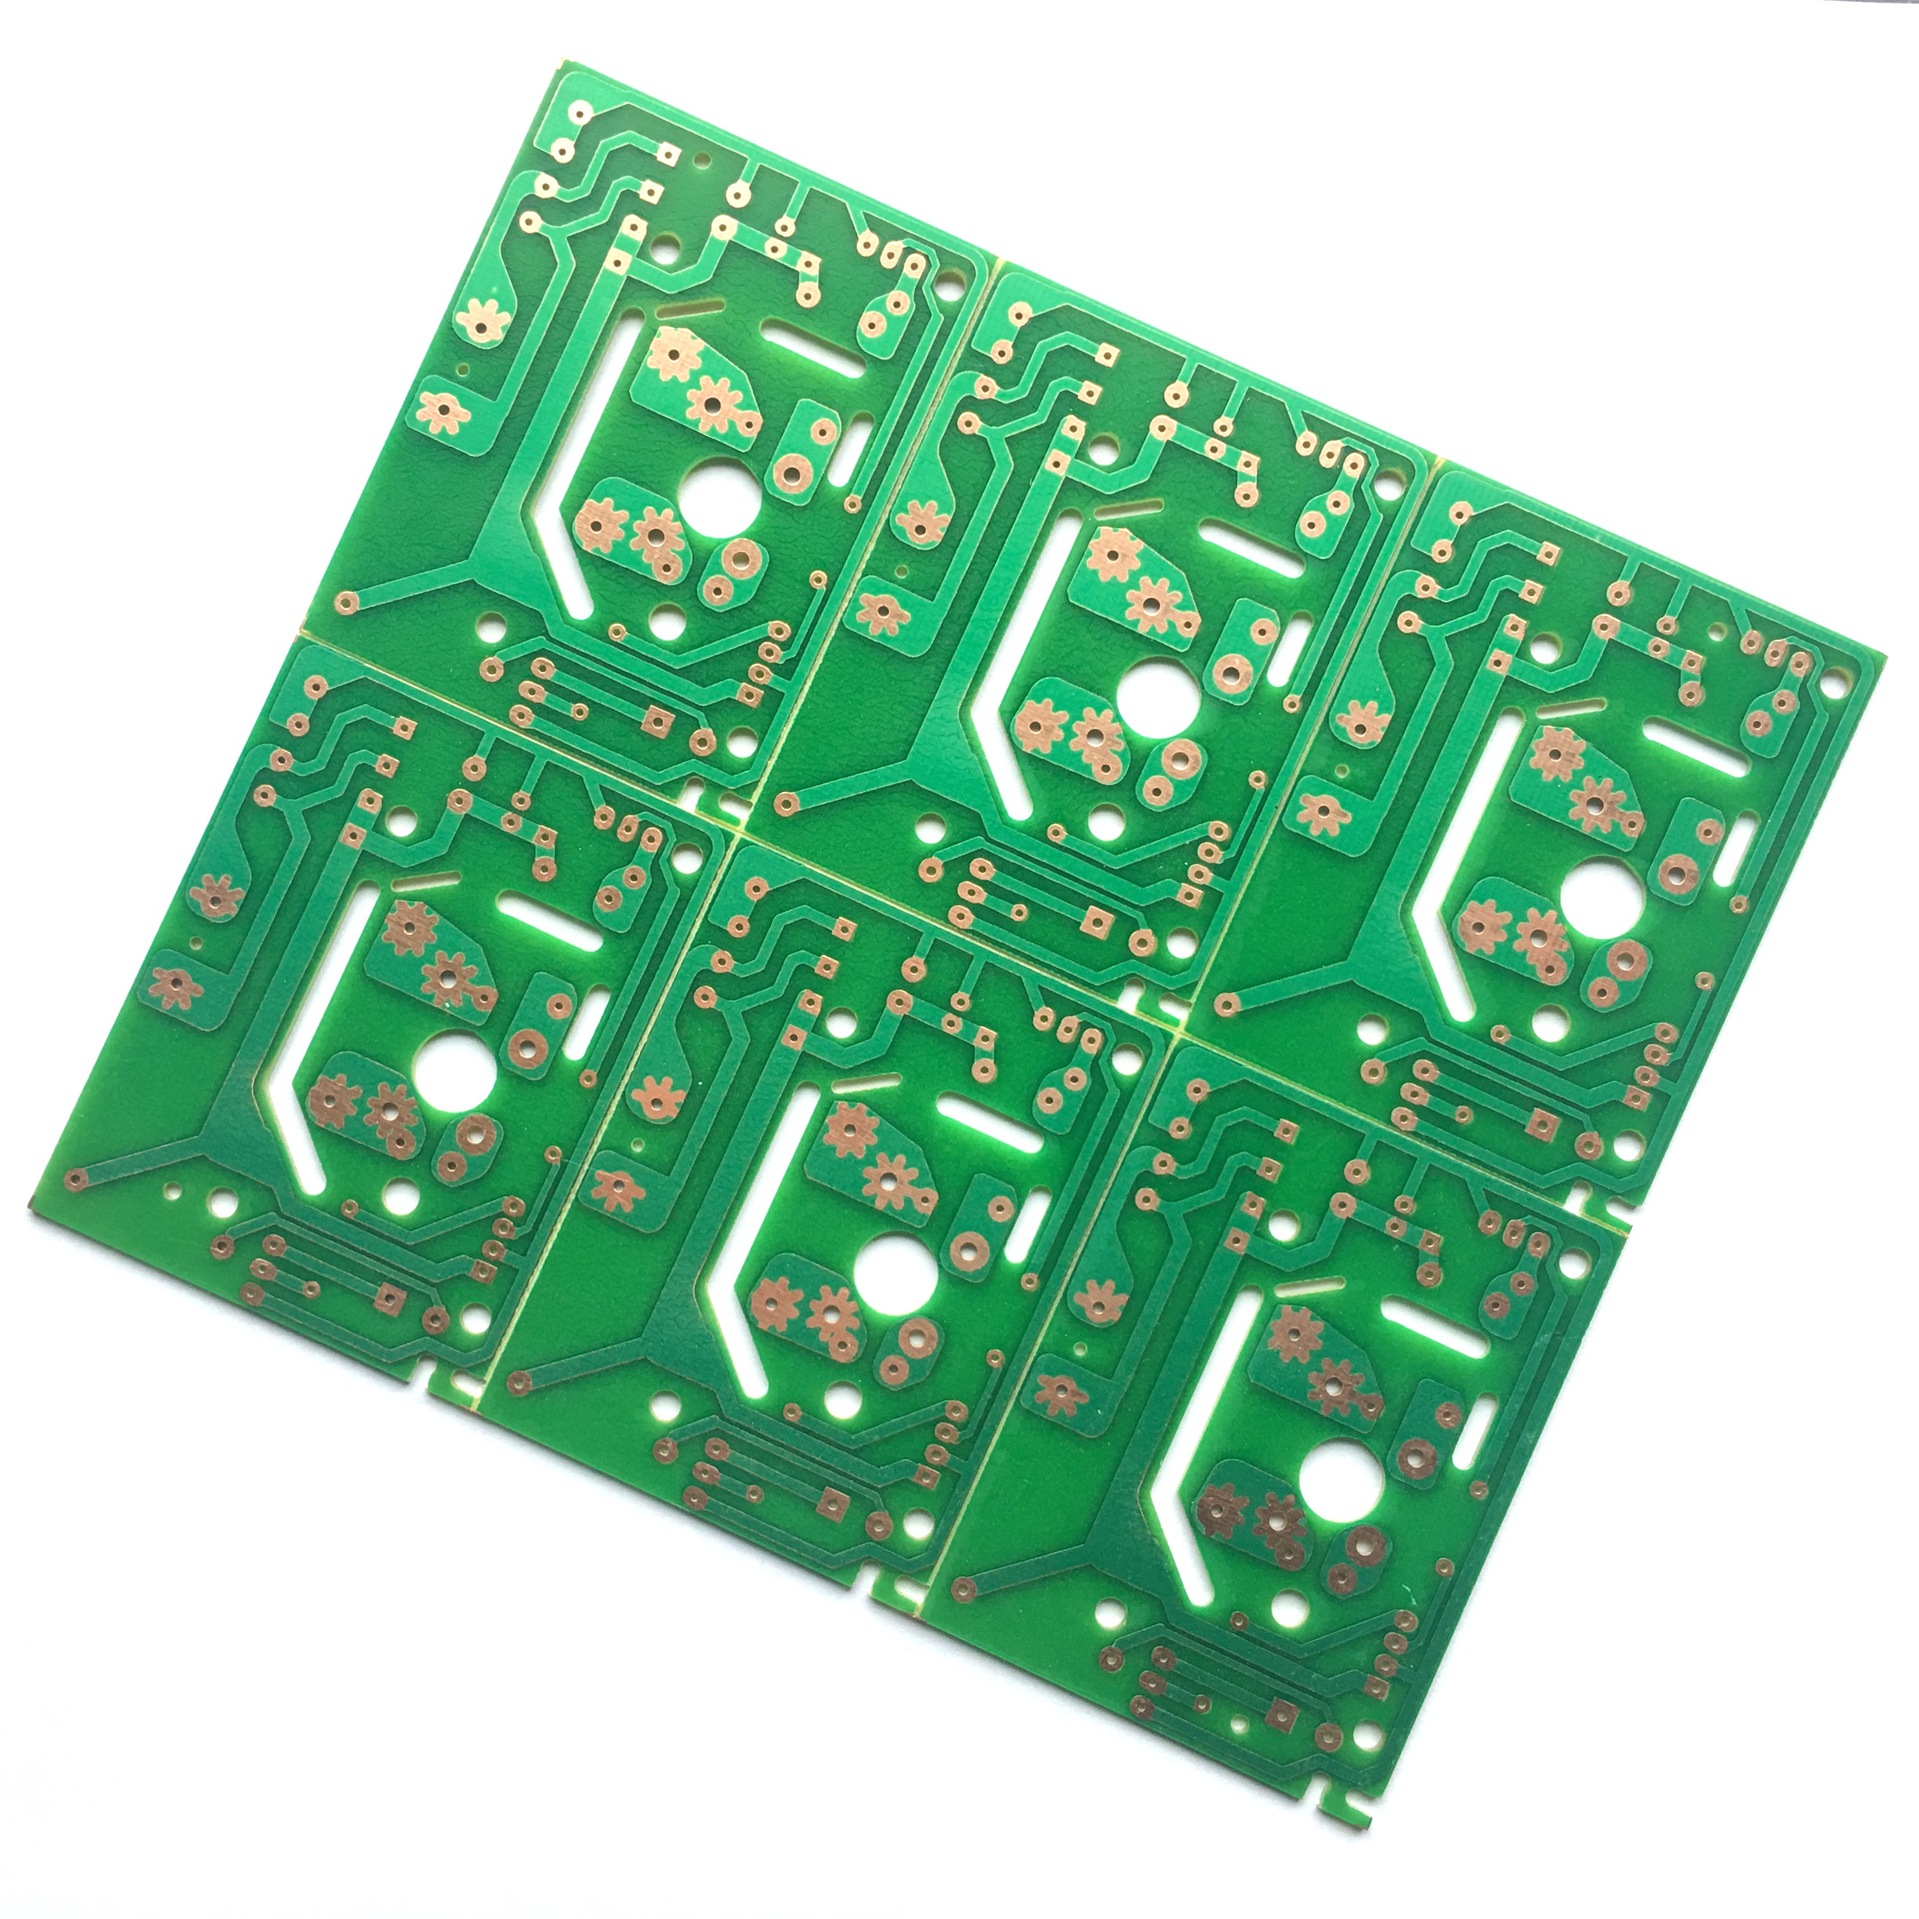 Basic knowledge of pcb design entry